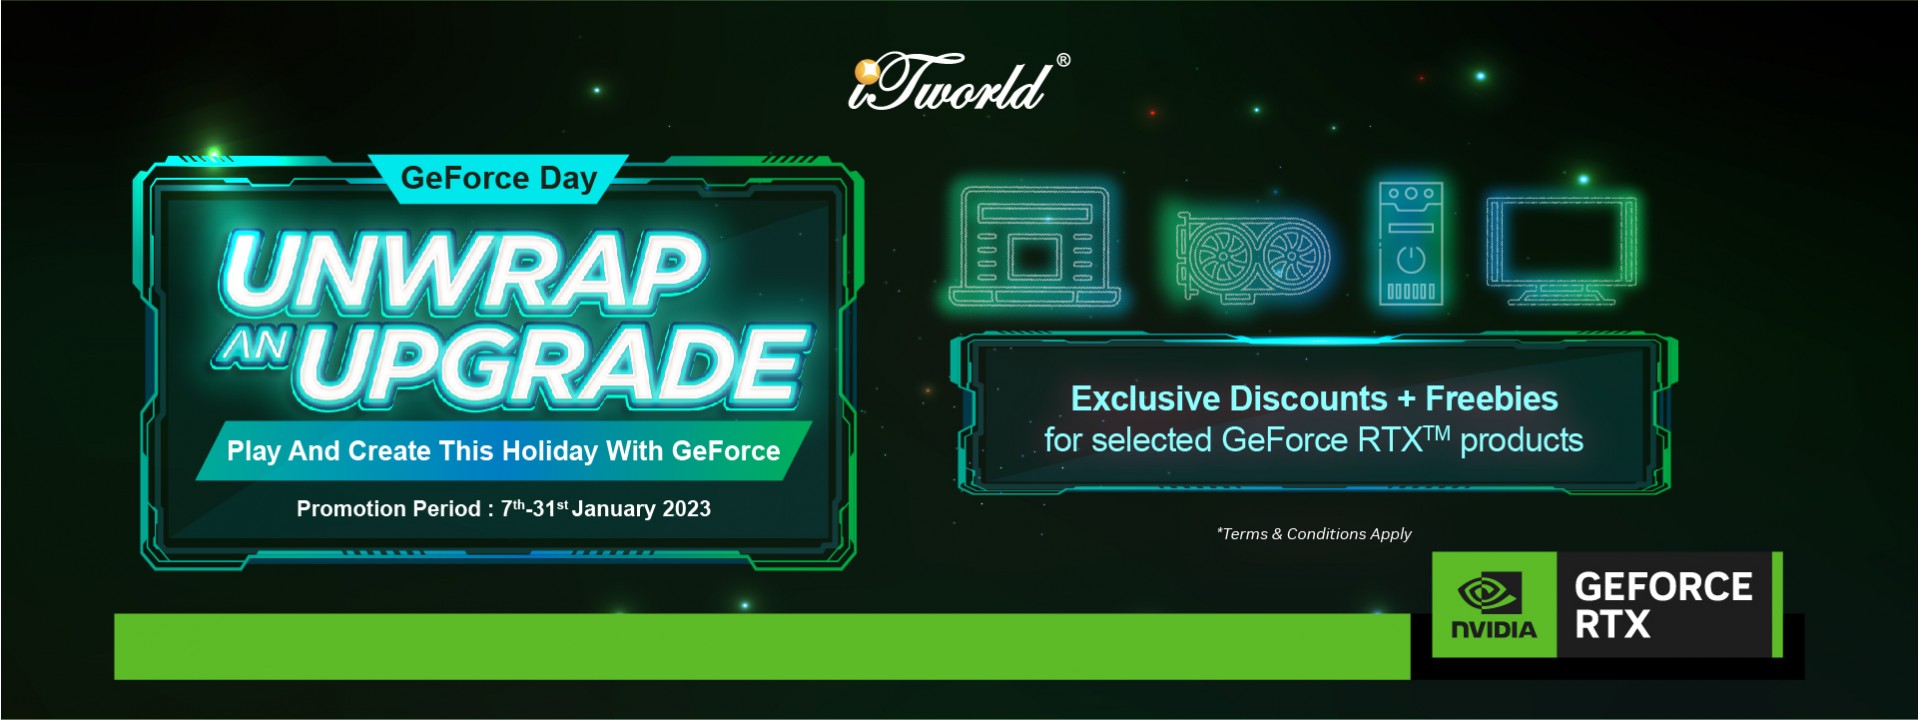 Unwrap-an-upgrade-this-holiday-with-GeForce